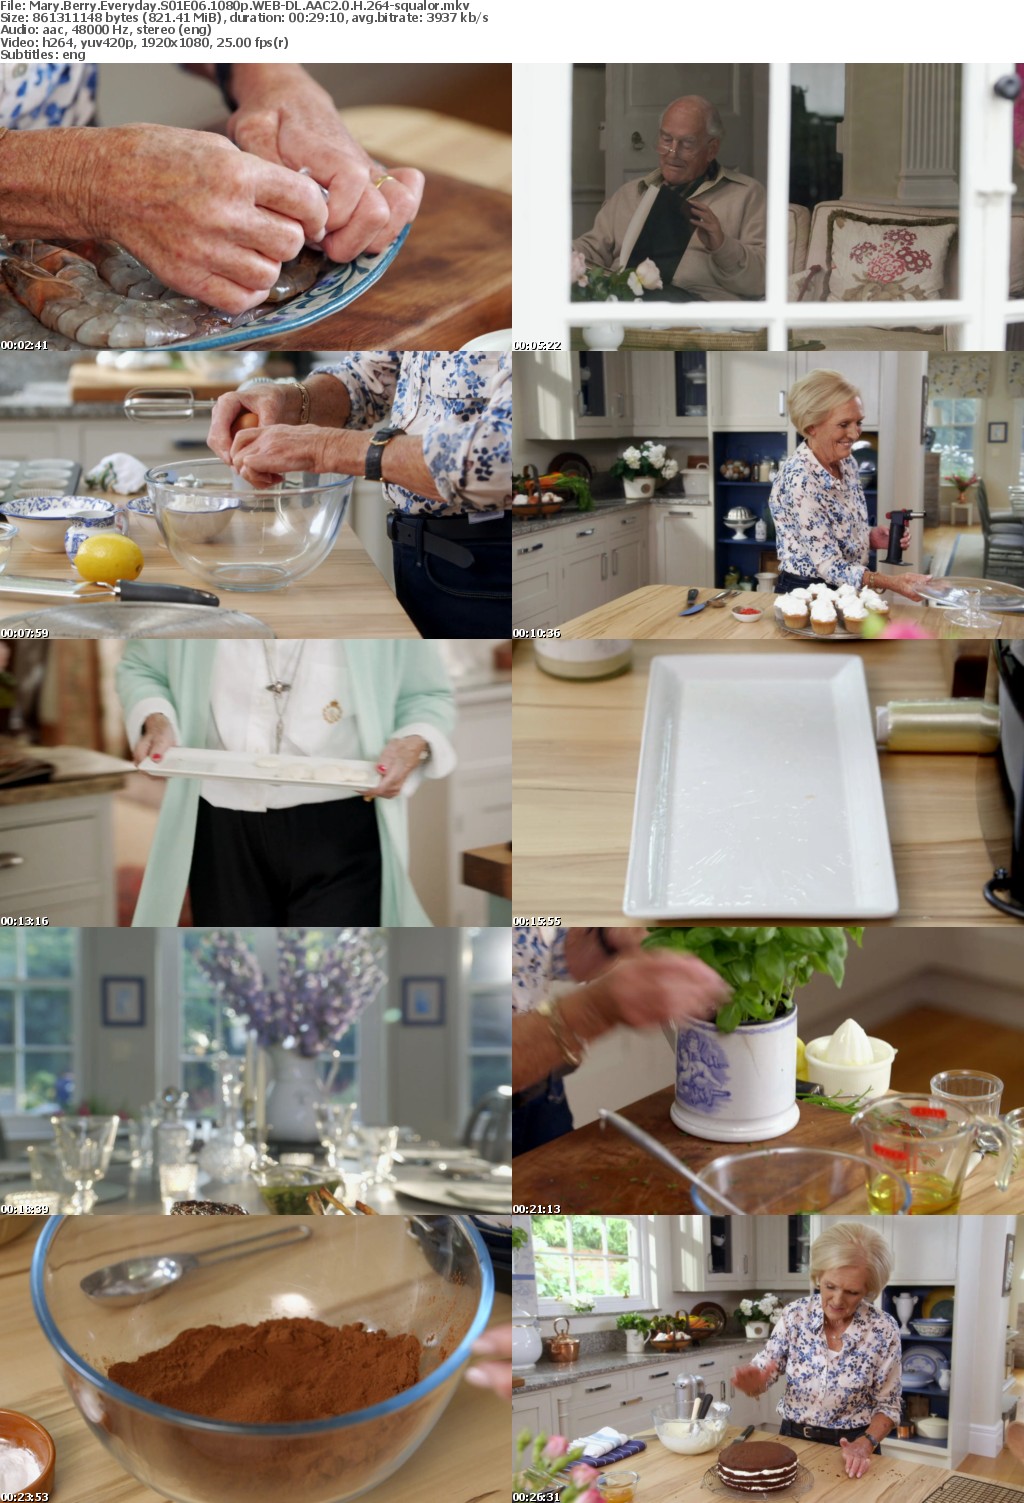 Mary Berry Everyday S01 1080p NF WEBRip AAC2 0 x264-squalor